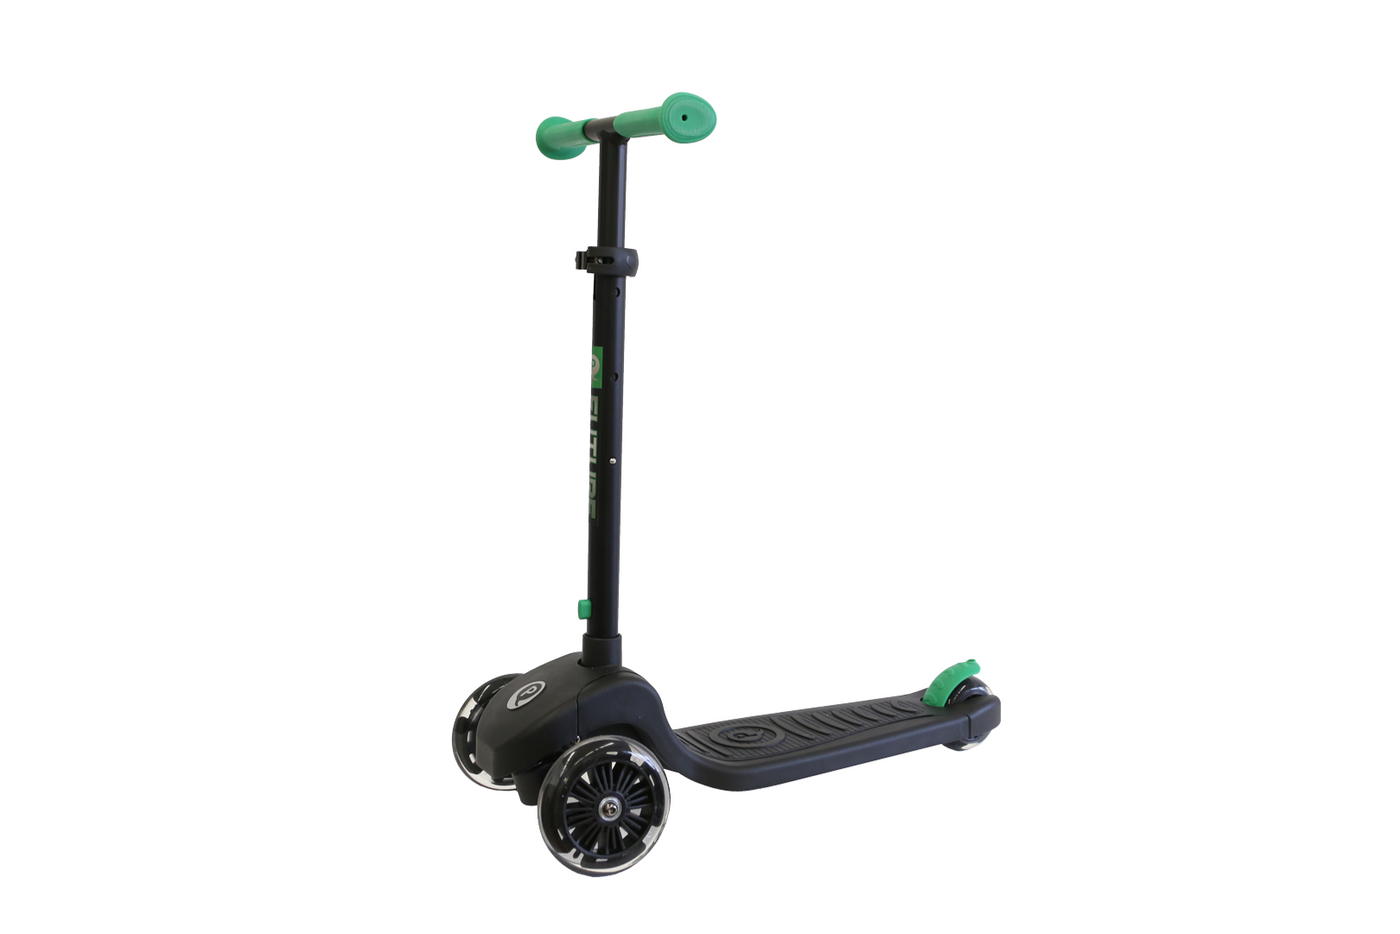 Green Future LED Light Scooter